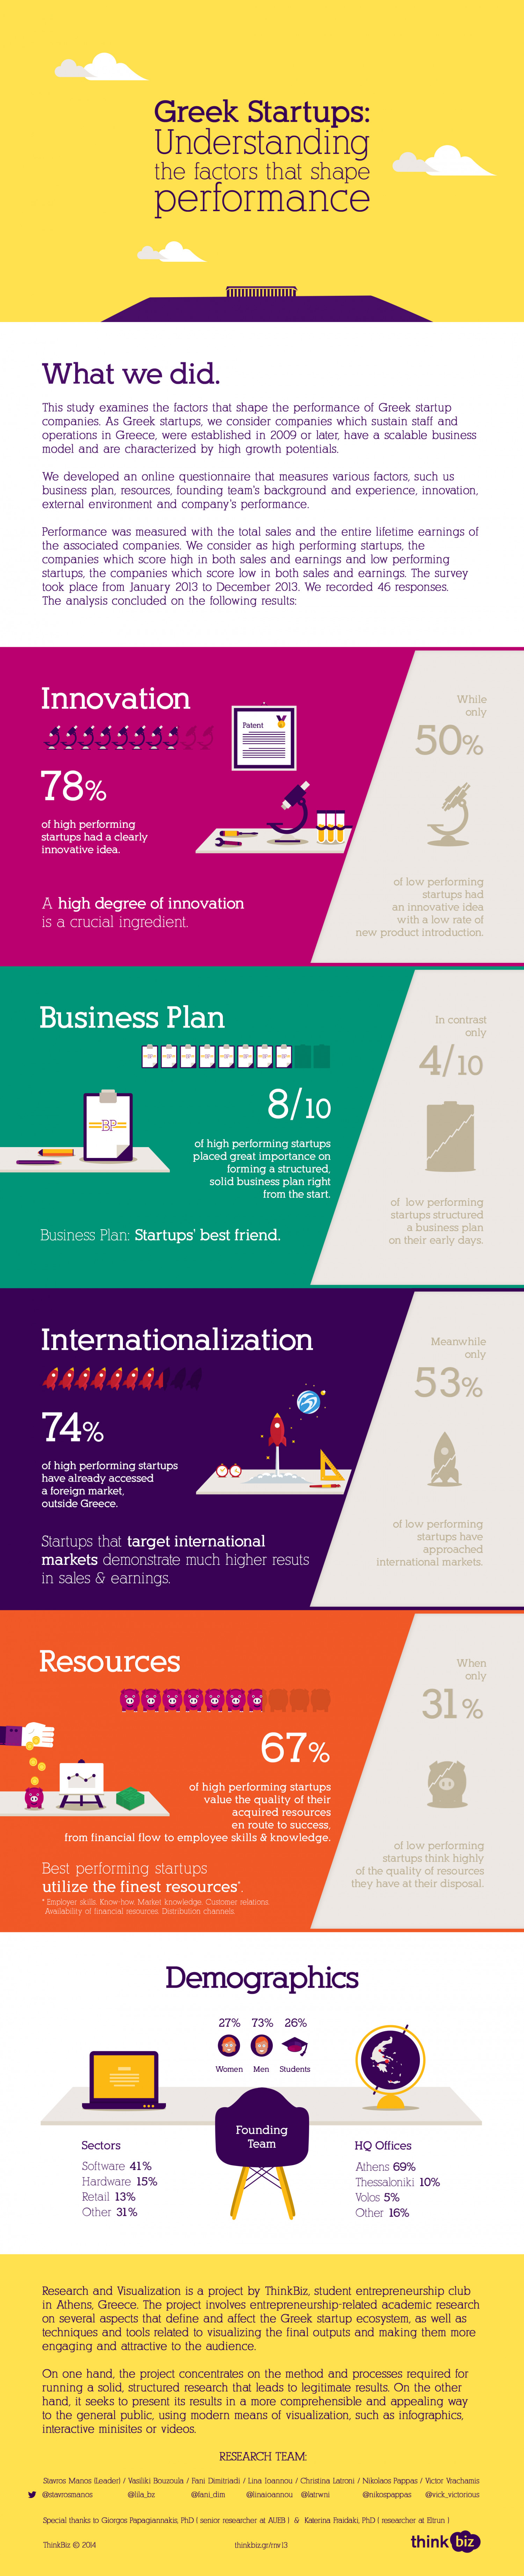 Greek Startups: Understanding the Factors That Shape Their Performance Infographic